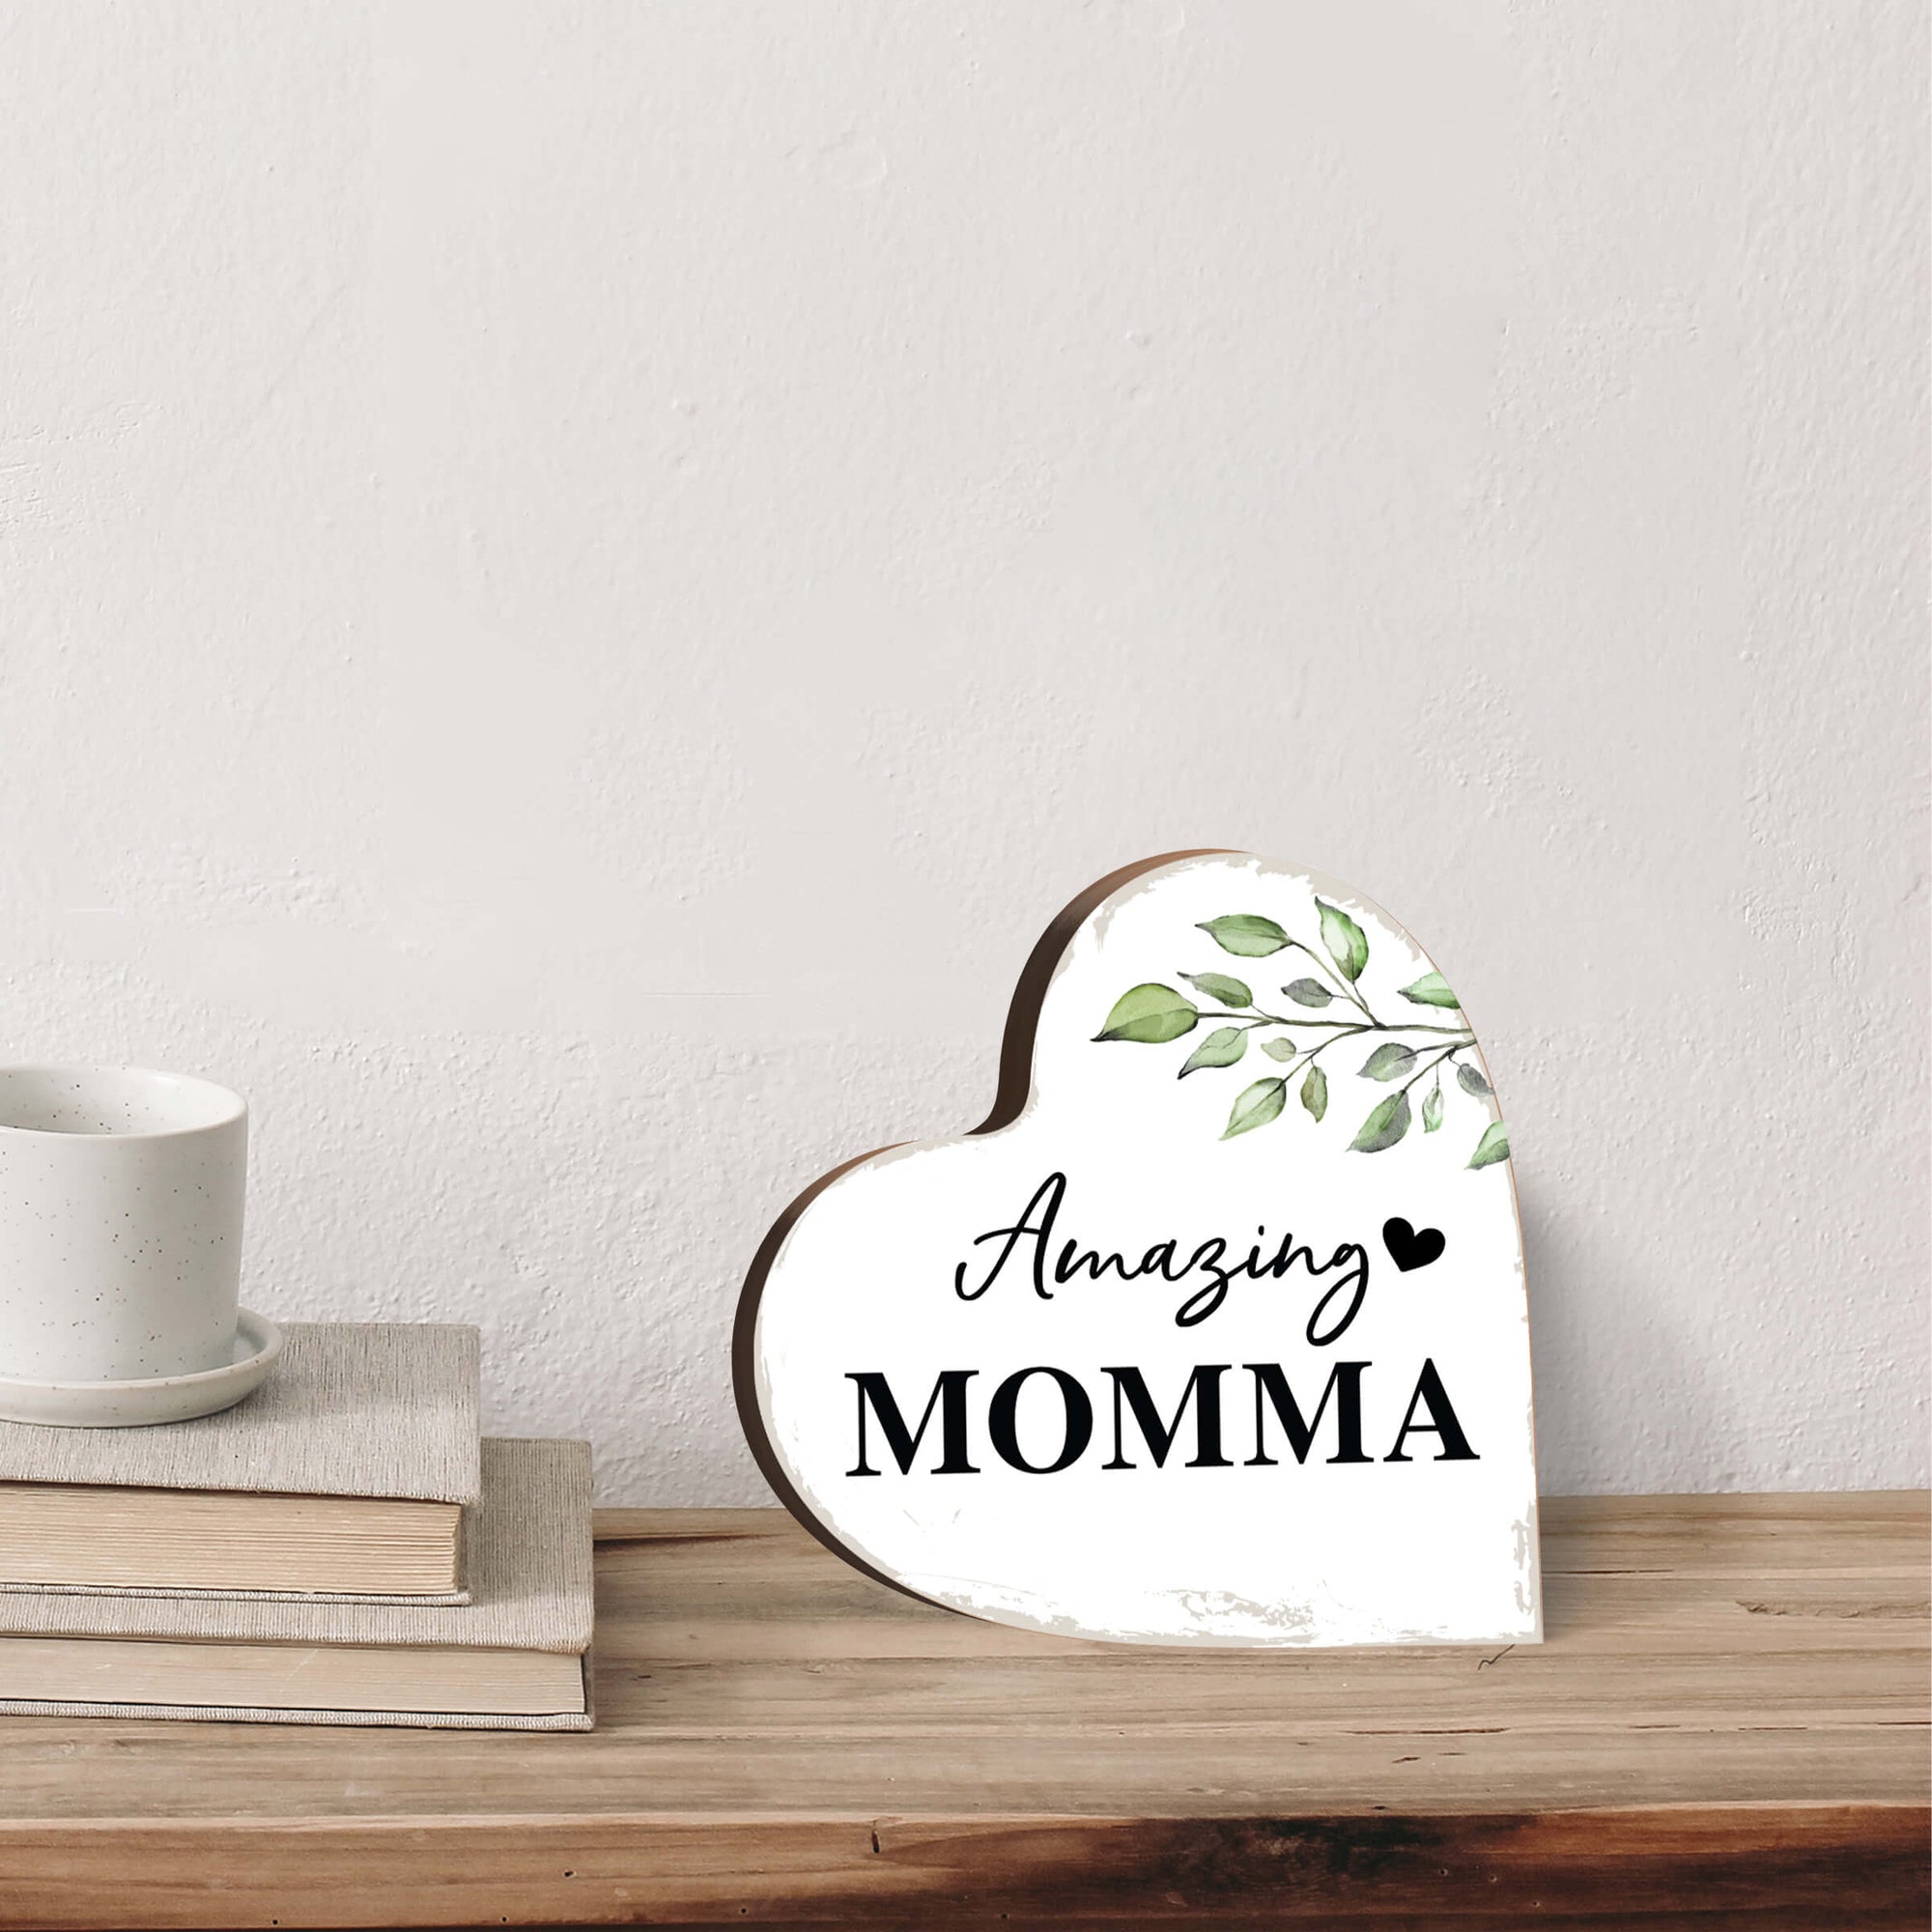 Heartfelt Wooden Block Sign - A Unique Mother's Day Gift for Mom with Inspirational Tabletop Décor